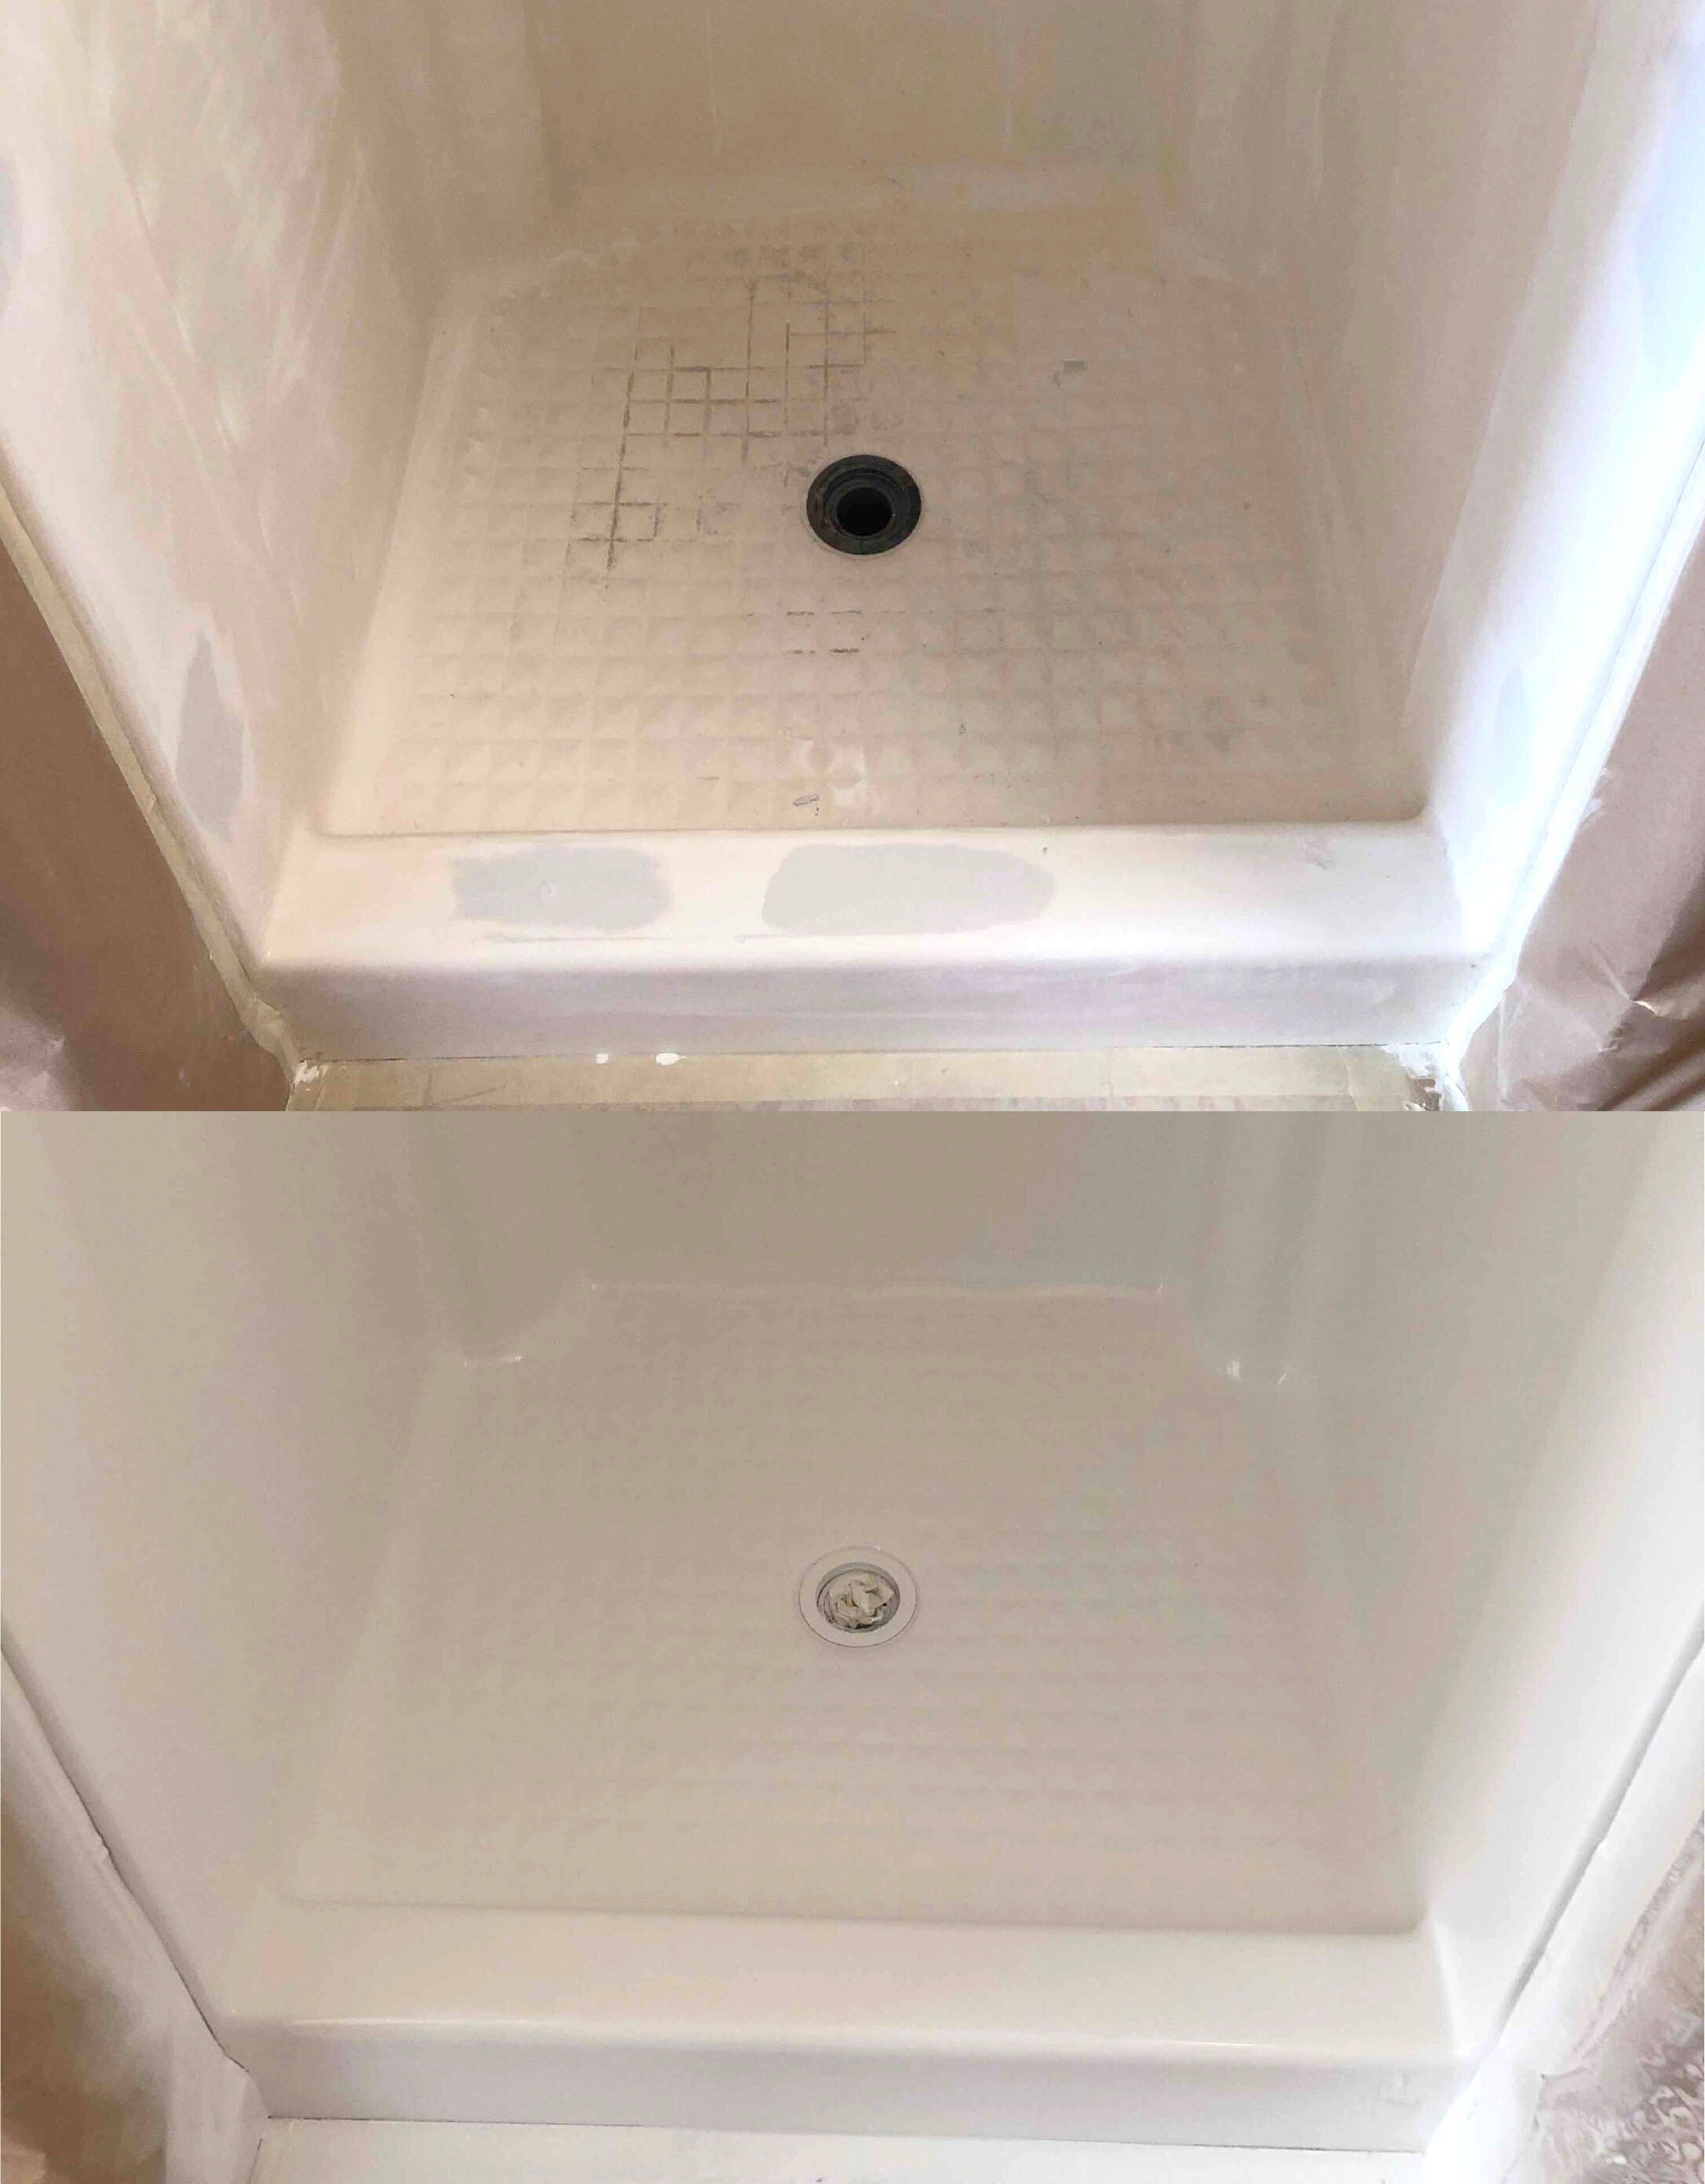   Removing old doors from a shower often leaves screw holes and gouges. After we repair these and resurface you can’t tell there was any damage at all.  